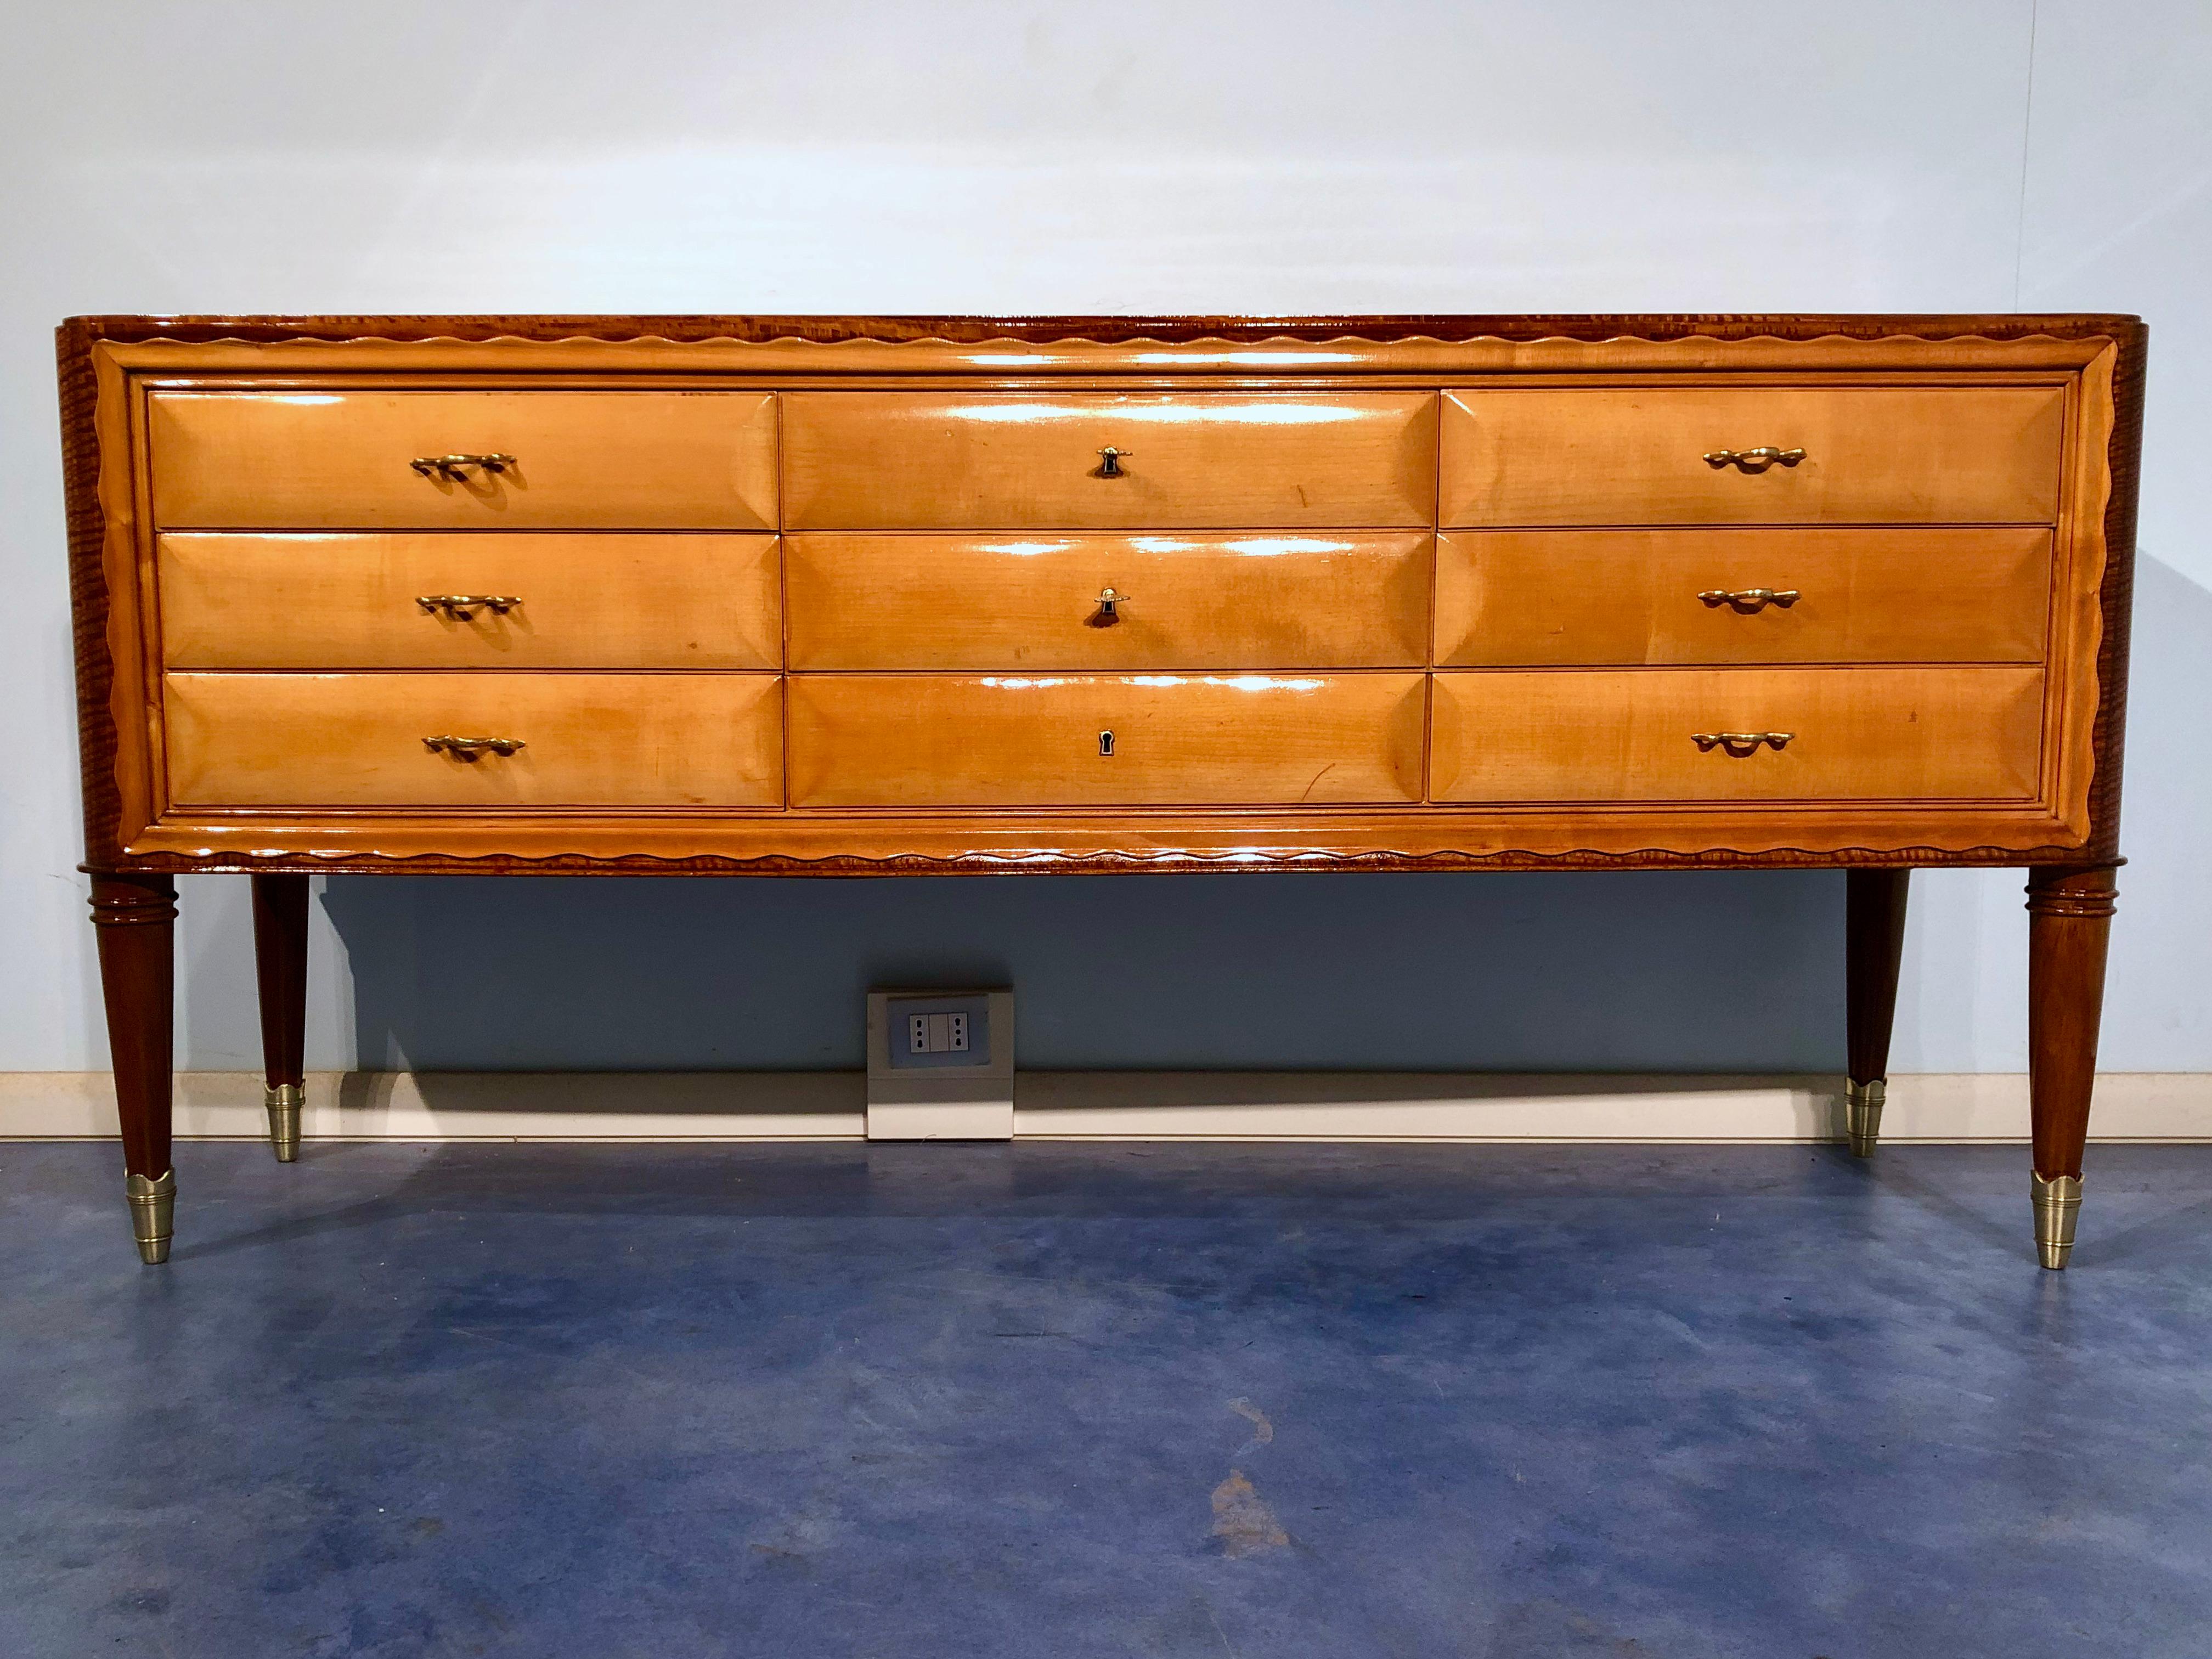 Italian Midcentury Sideboard or Chest of Drawers by Paolo Buffa, 1950s In Good Condition For Sale In Traversetolo, IT